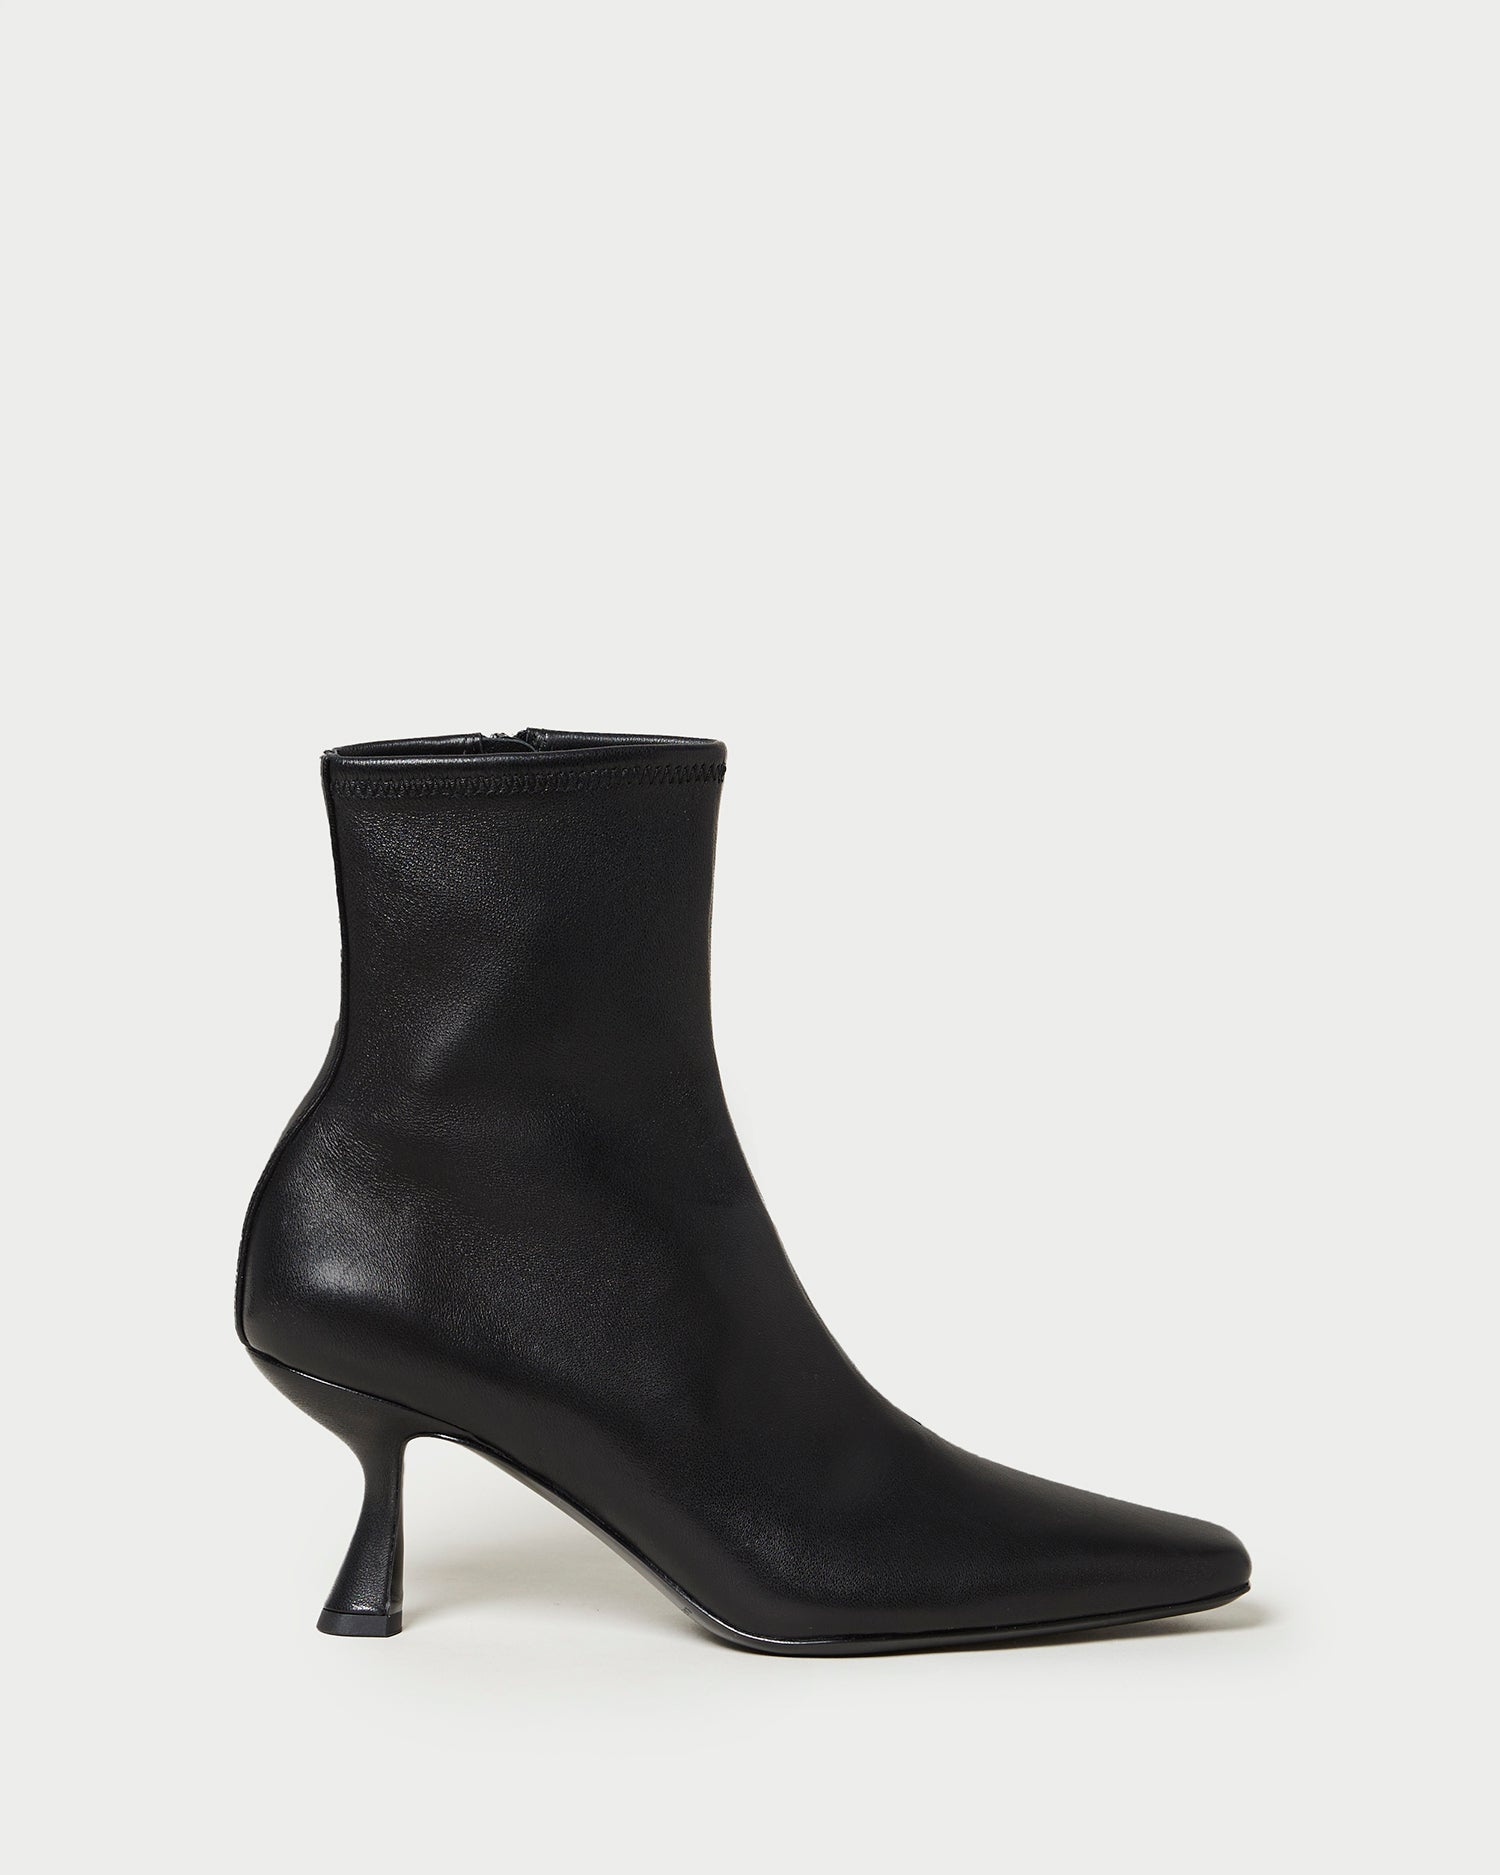 Women's boots and ankle boots: elegant and comfortable | Tosca Blu